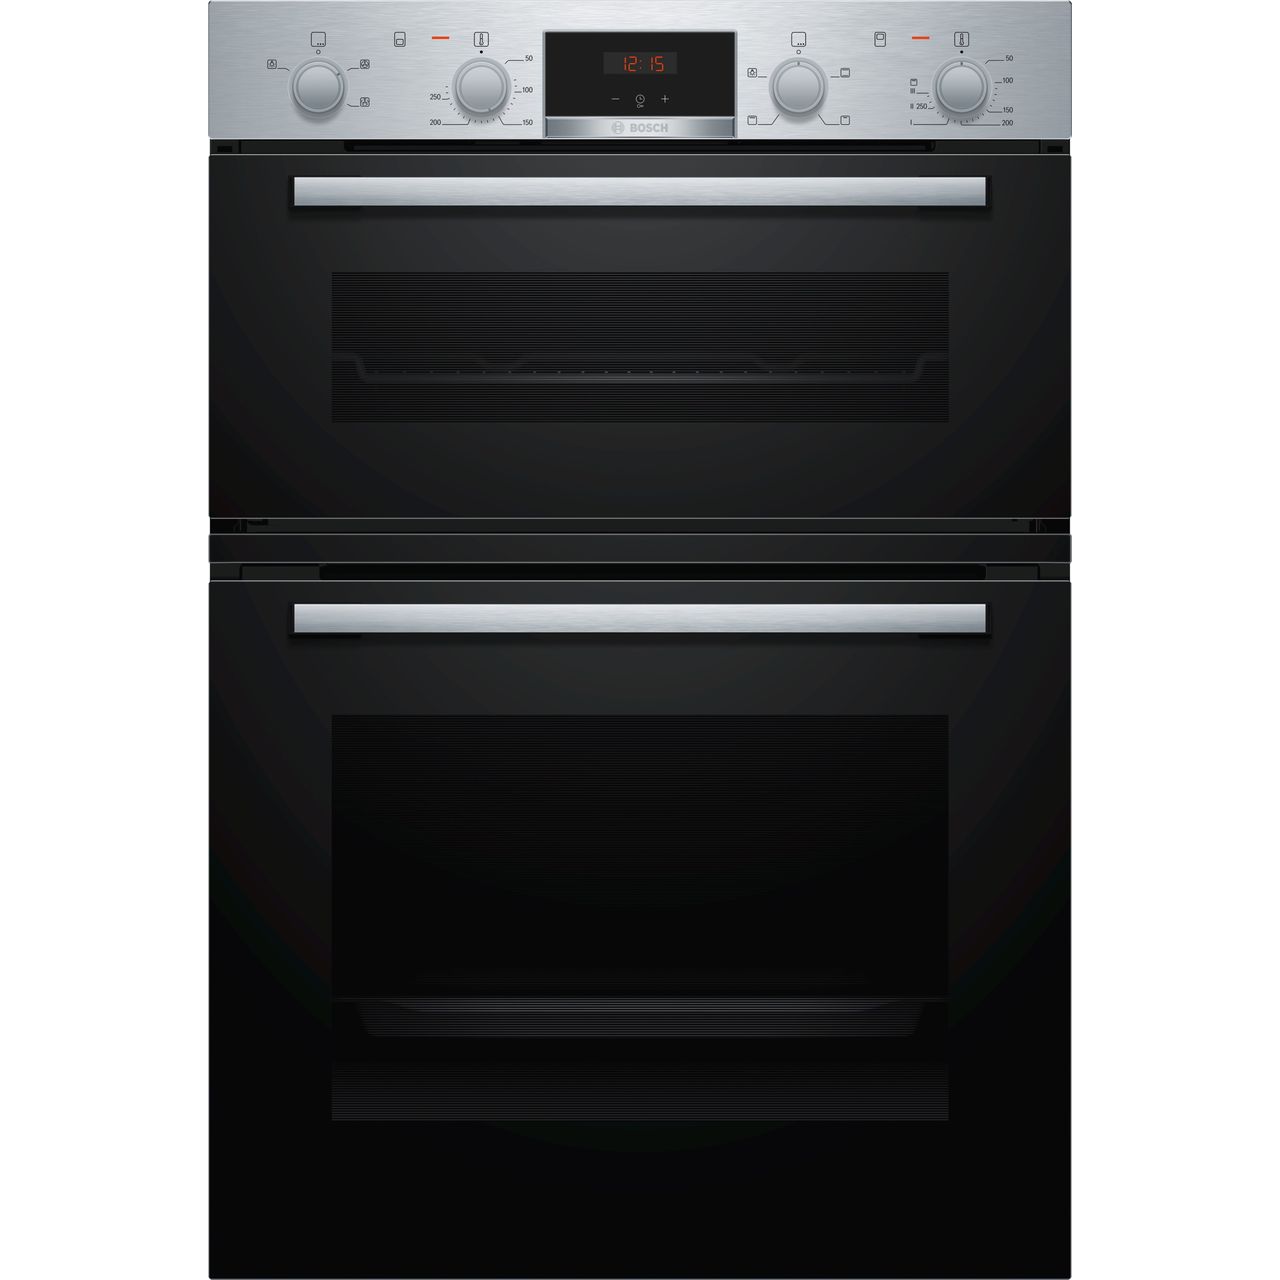 Bosch Serie 2 MHA133BR0B Built In Double Oven Review